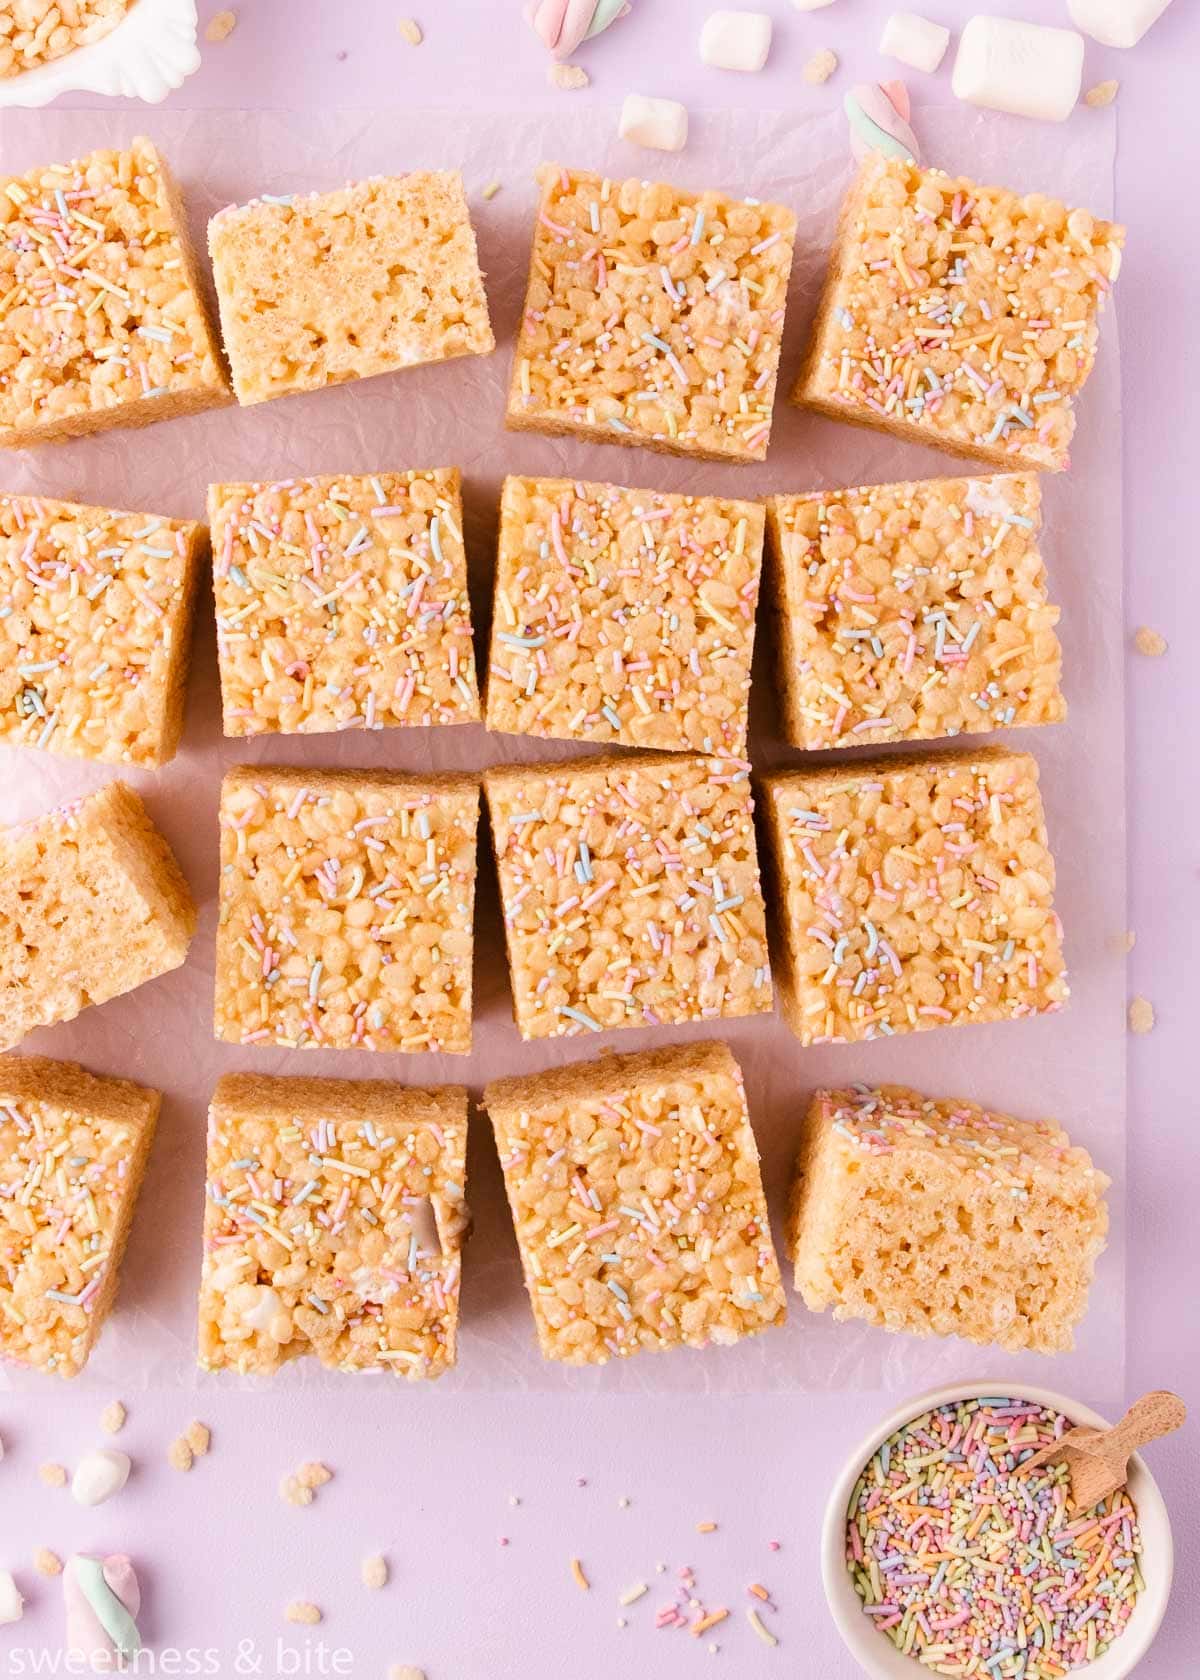 Squares of rice krispie treat arranged haphazardly on a sheet of crinkled parchment on a lilac background, with mini marshmallows, rice krispies and sprinkles scattered around. 